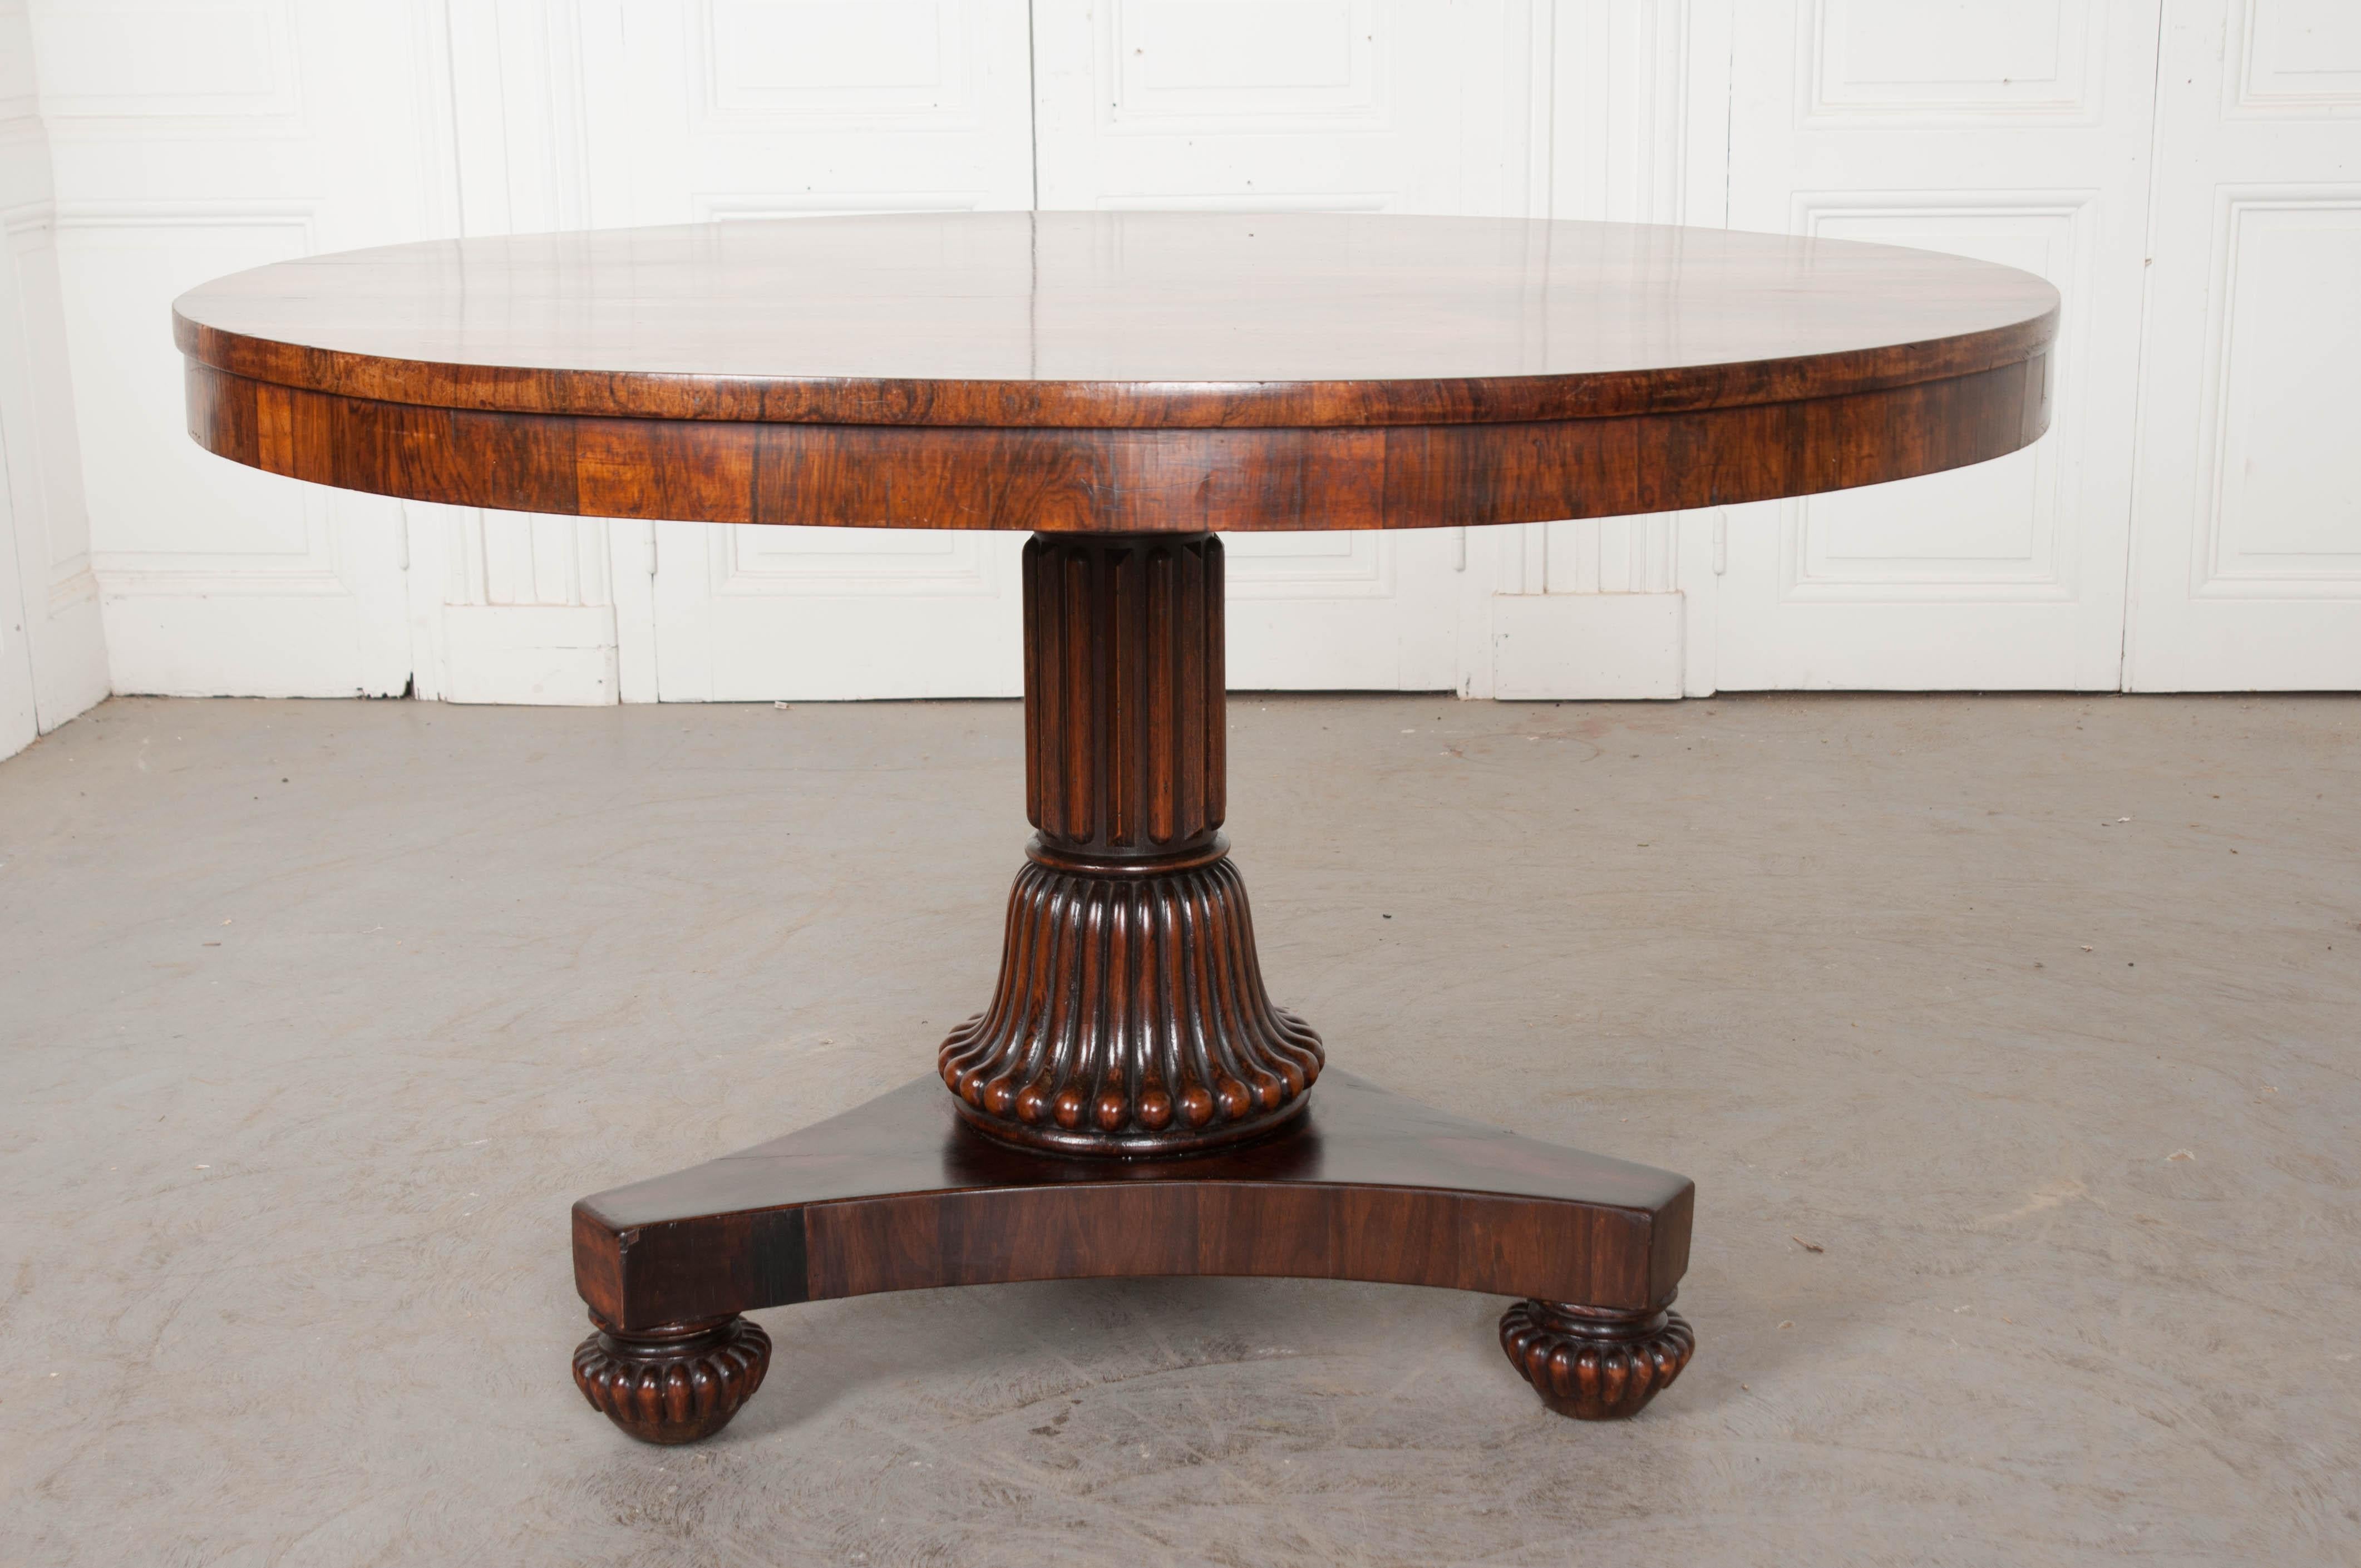 This exceptional Irish Regency figured rosewood center table, by Gillingtons of Dublin, circa 1815-1838, features a finely figured circular tilt-top with excellent patina and substantial brass handled on the underside, cross-grained rim, and